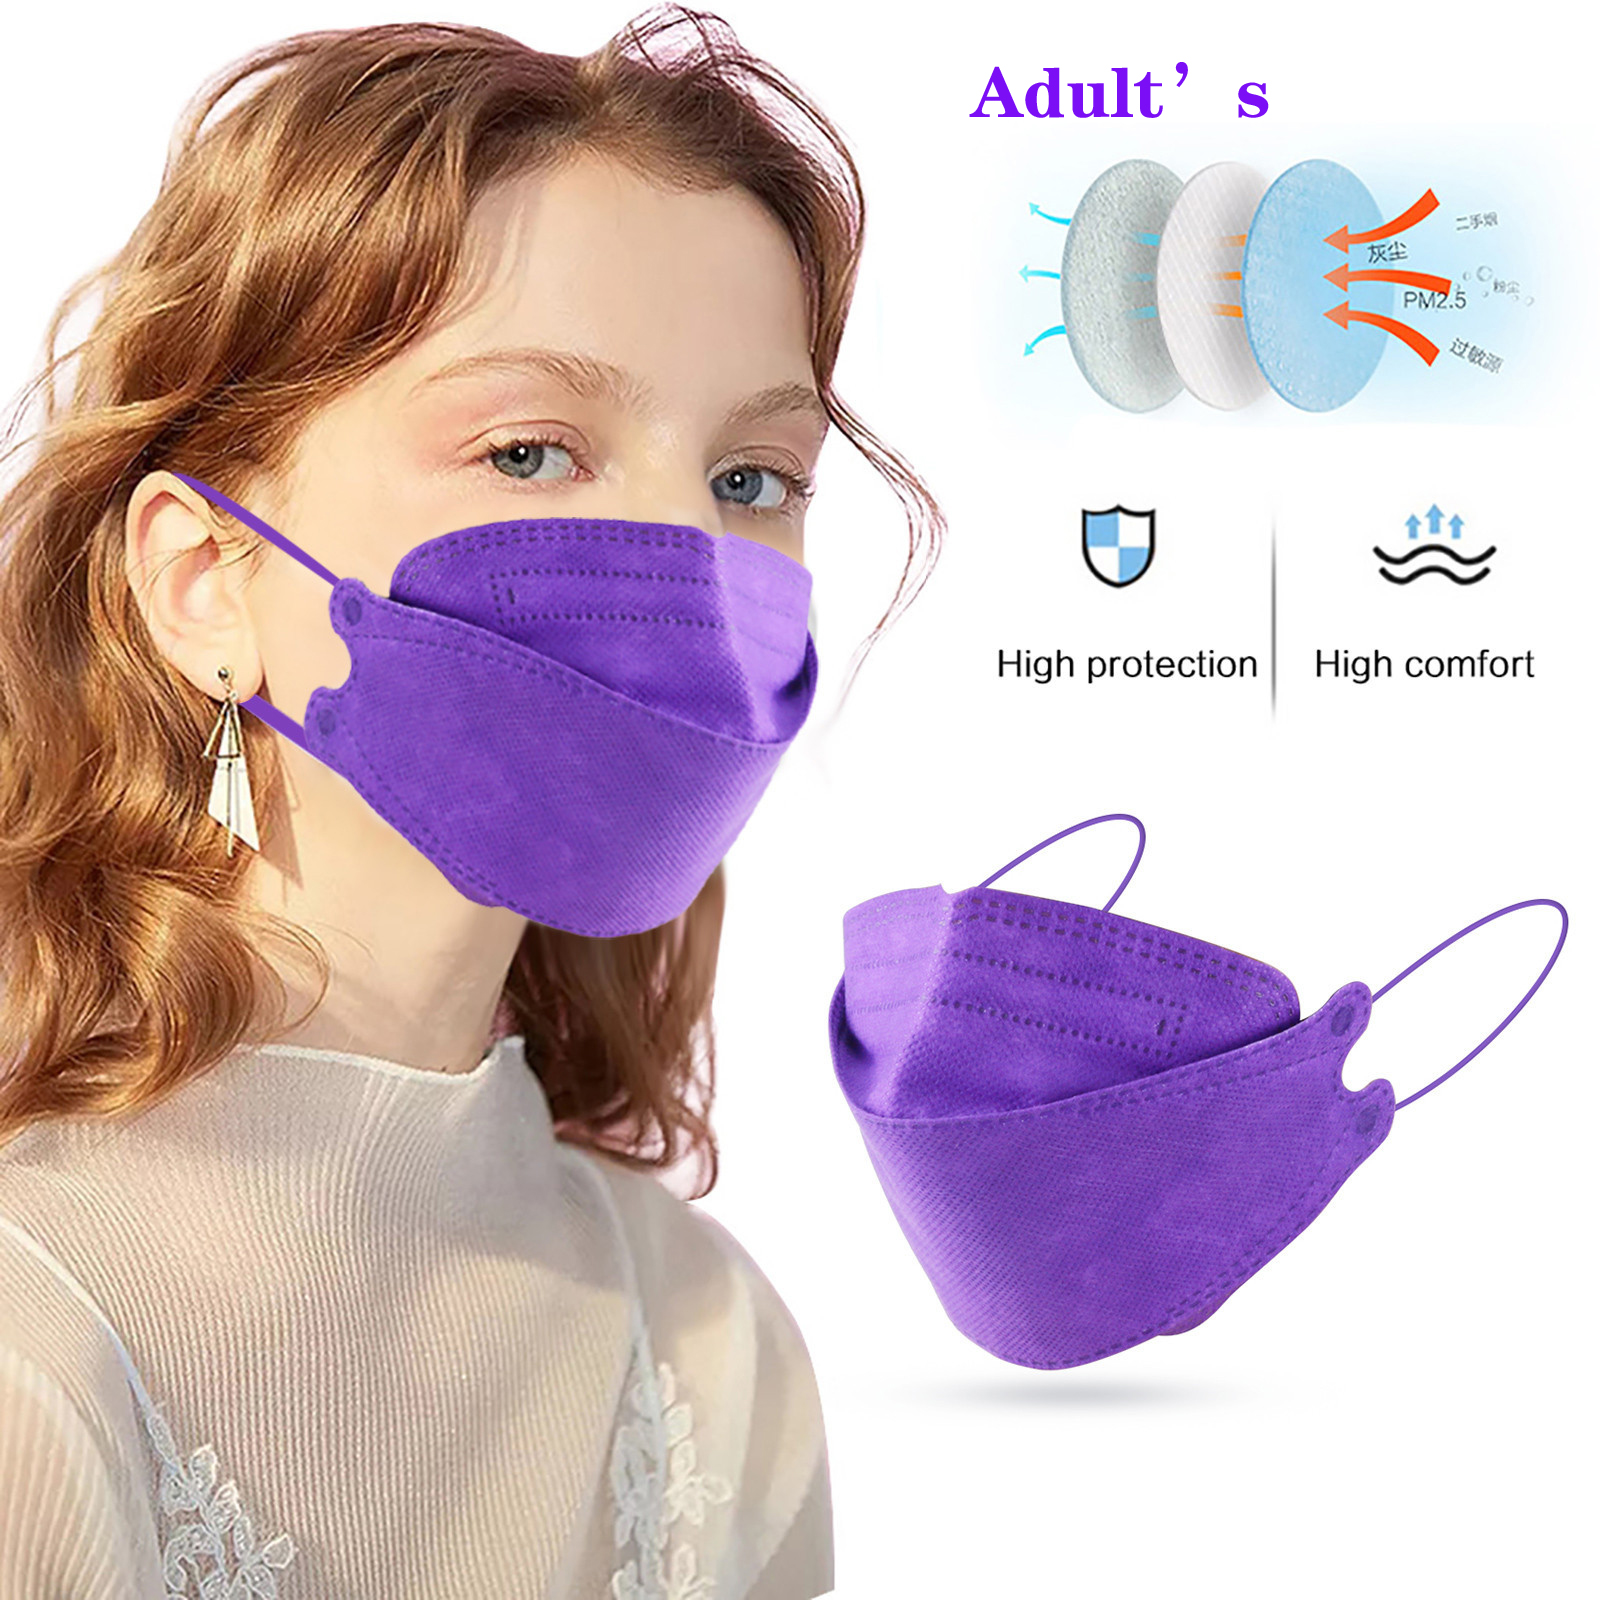 Headband masques Adult Children маска Outdoor Mask Droplet And Haze Prevention Fish Non Woven Face Mask breathable mask бандана#